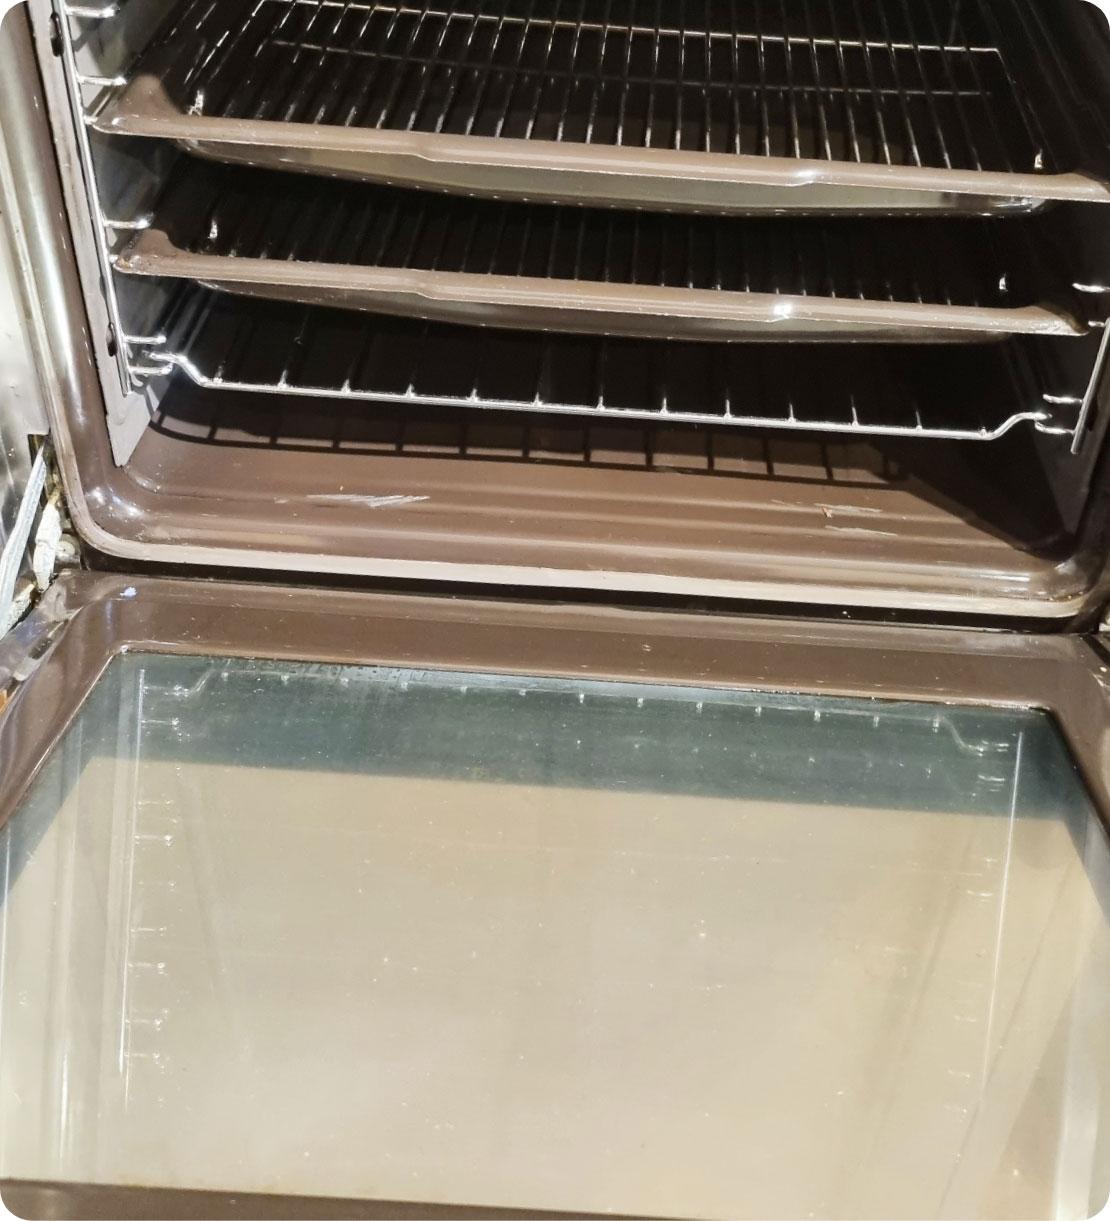 The image shows a sparkling clean oven after being clean by a Fantastic Service professional.